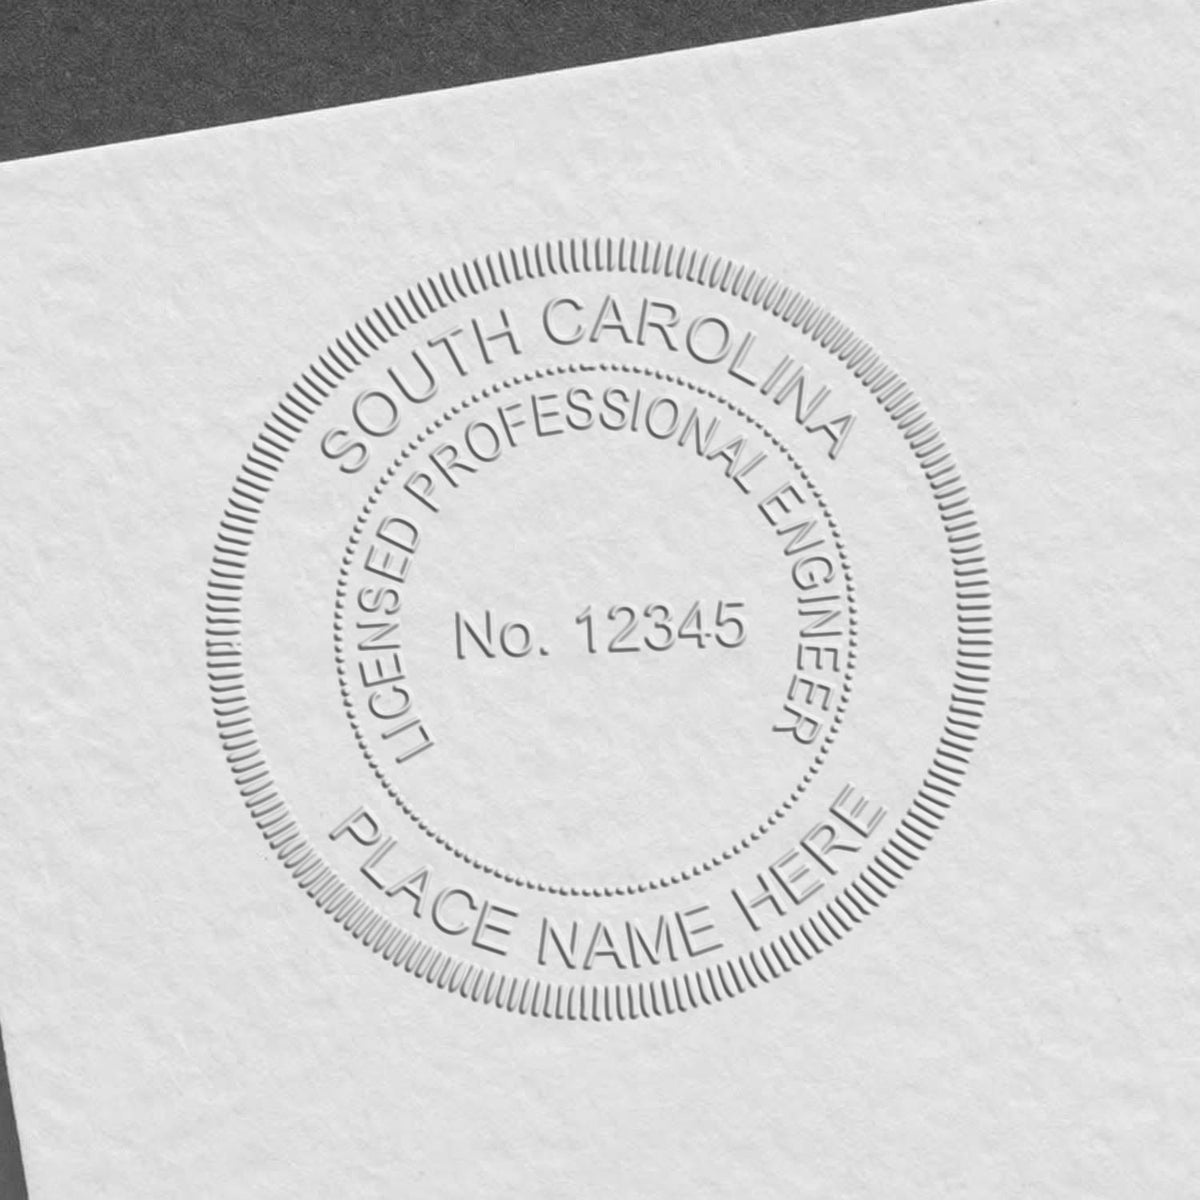 A stamped impression of the South Carolina Engineer Desk Seal in this stylish lifestyle photo, setting the tone for a unique and personalized product.